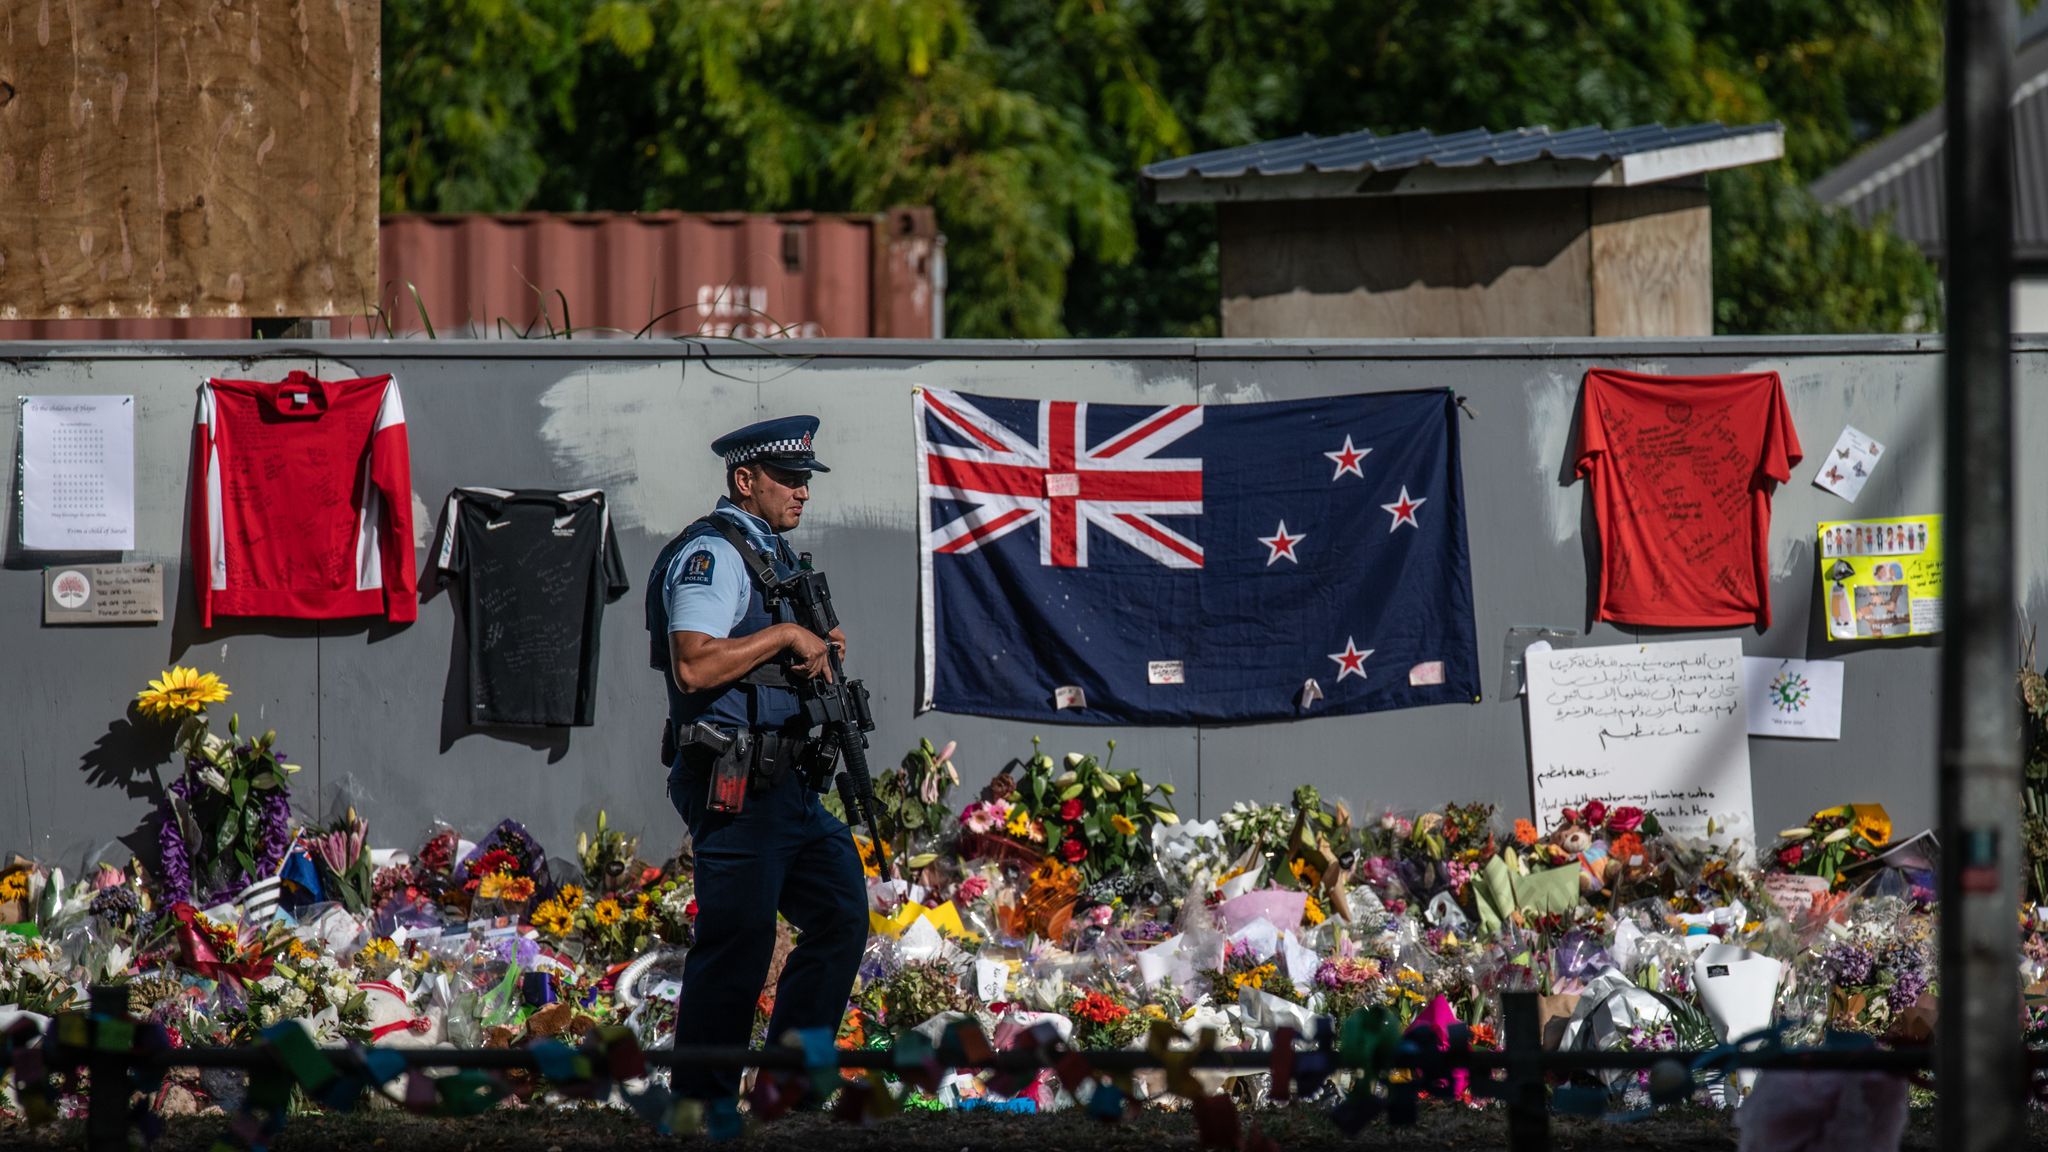 video of shooting in christchurch raw footage